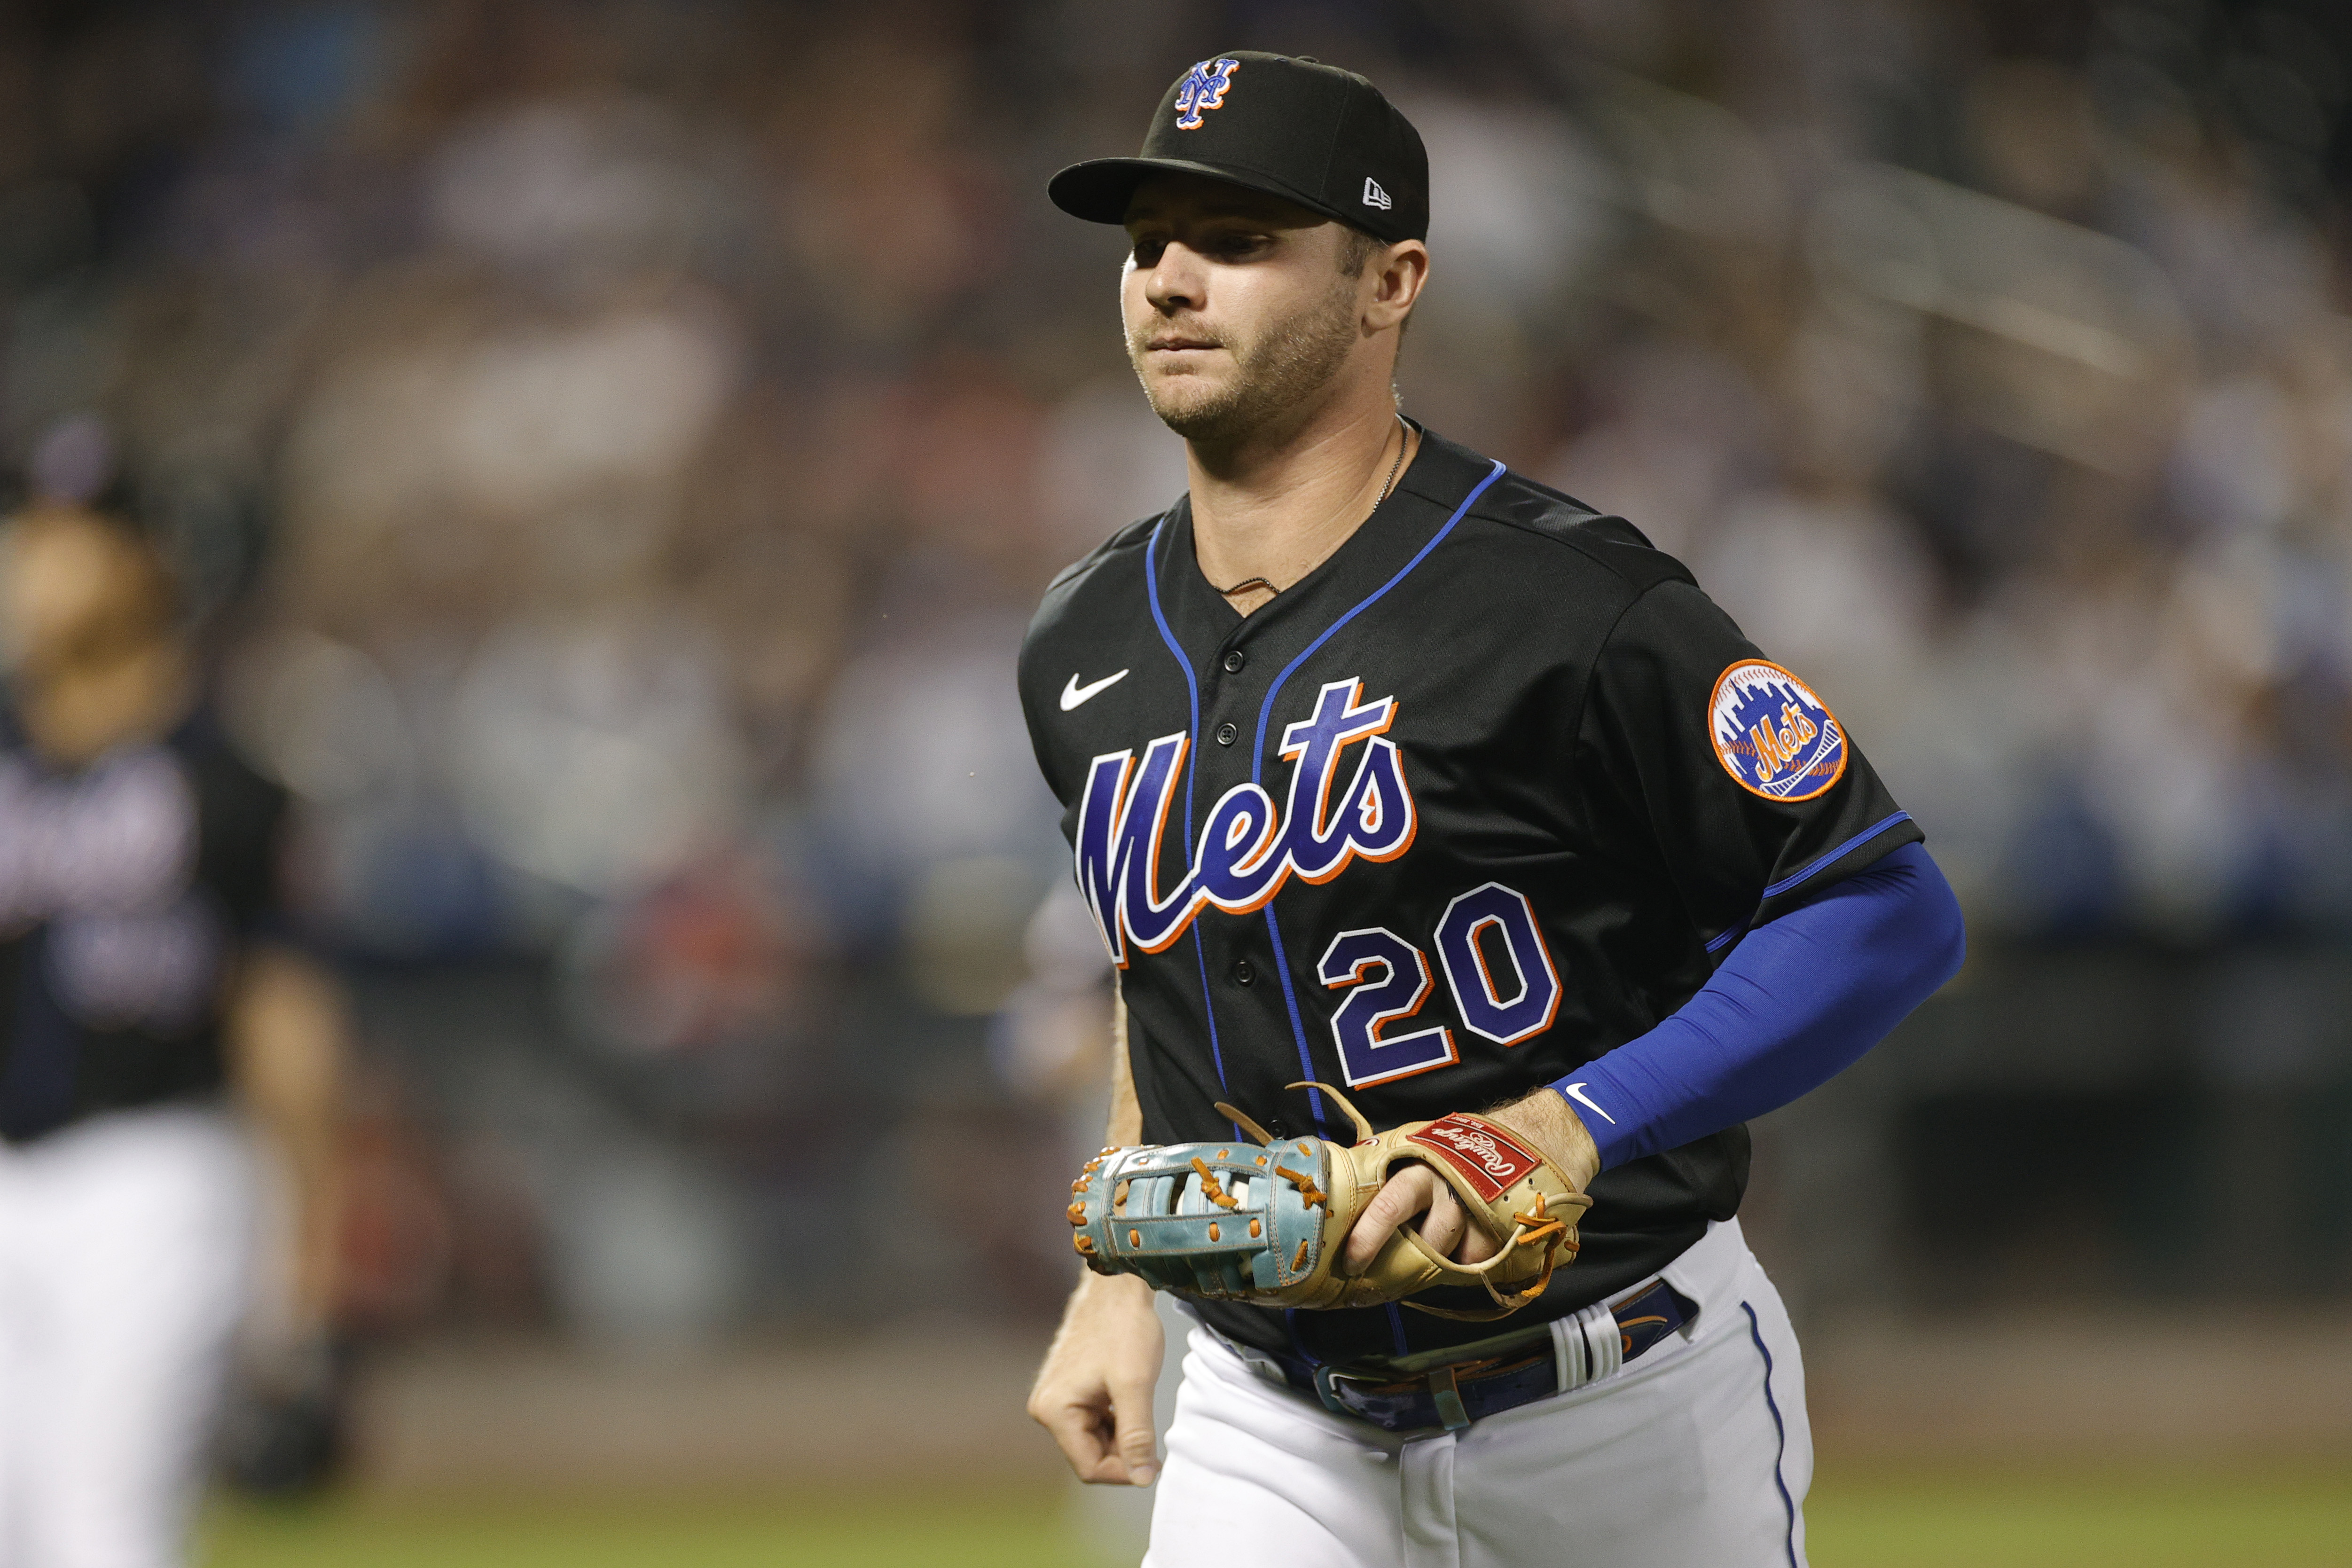 Pete Alonso #20 of the New York Mets looks on during the fourth inning against the Philadelphia Phillies at Citi Field on September 17, 2021 in the Queens borough of New York City.